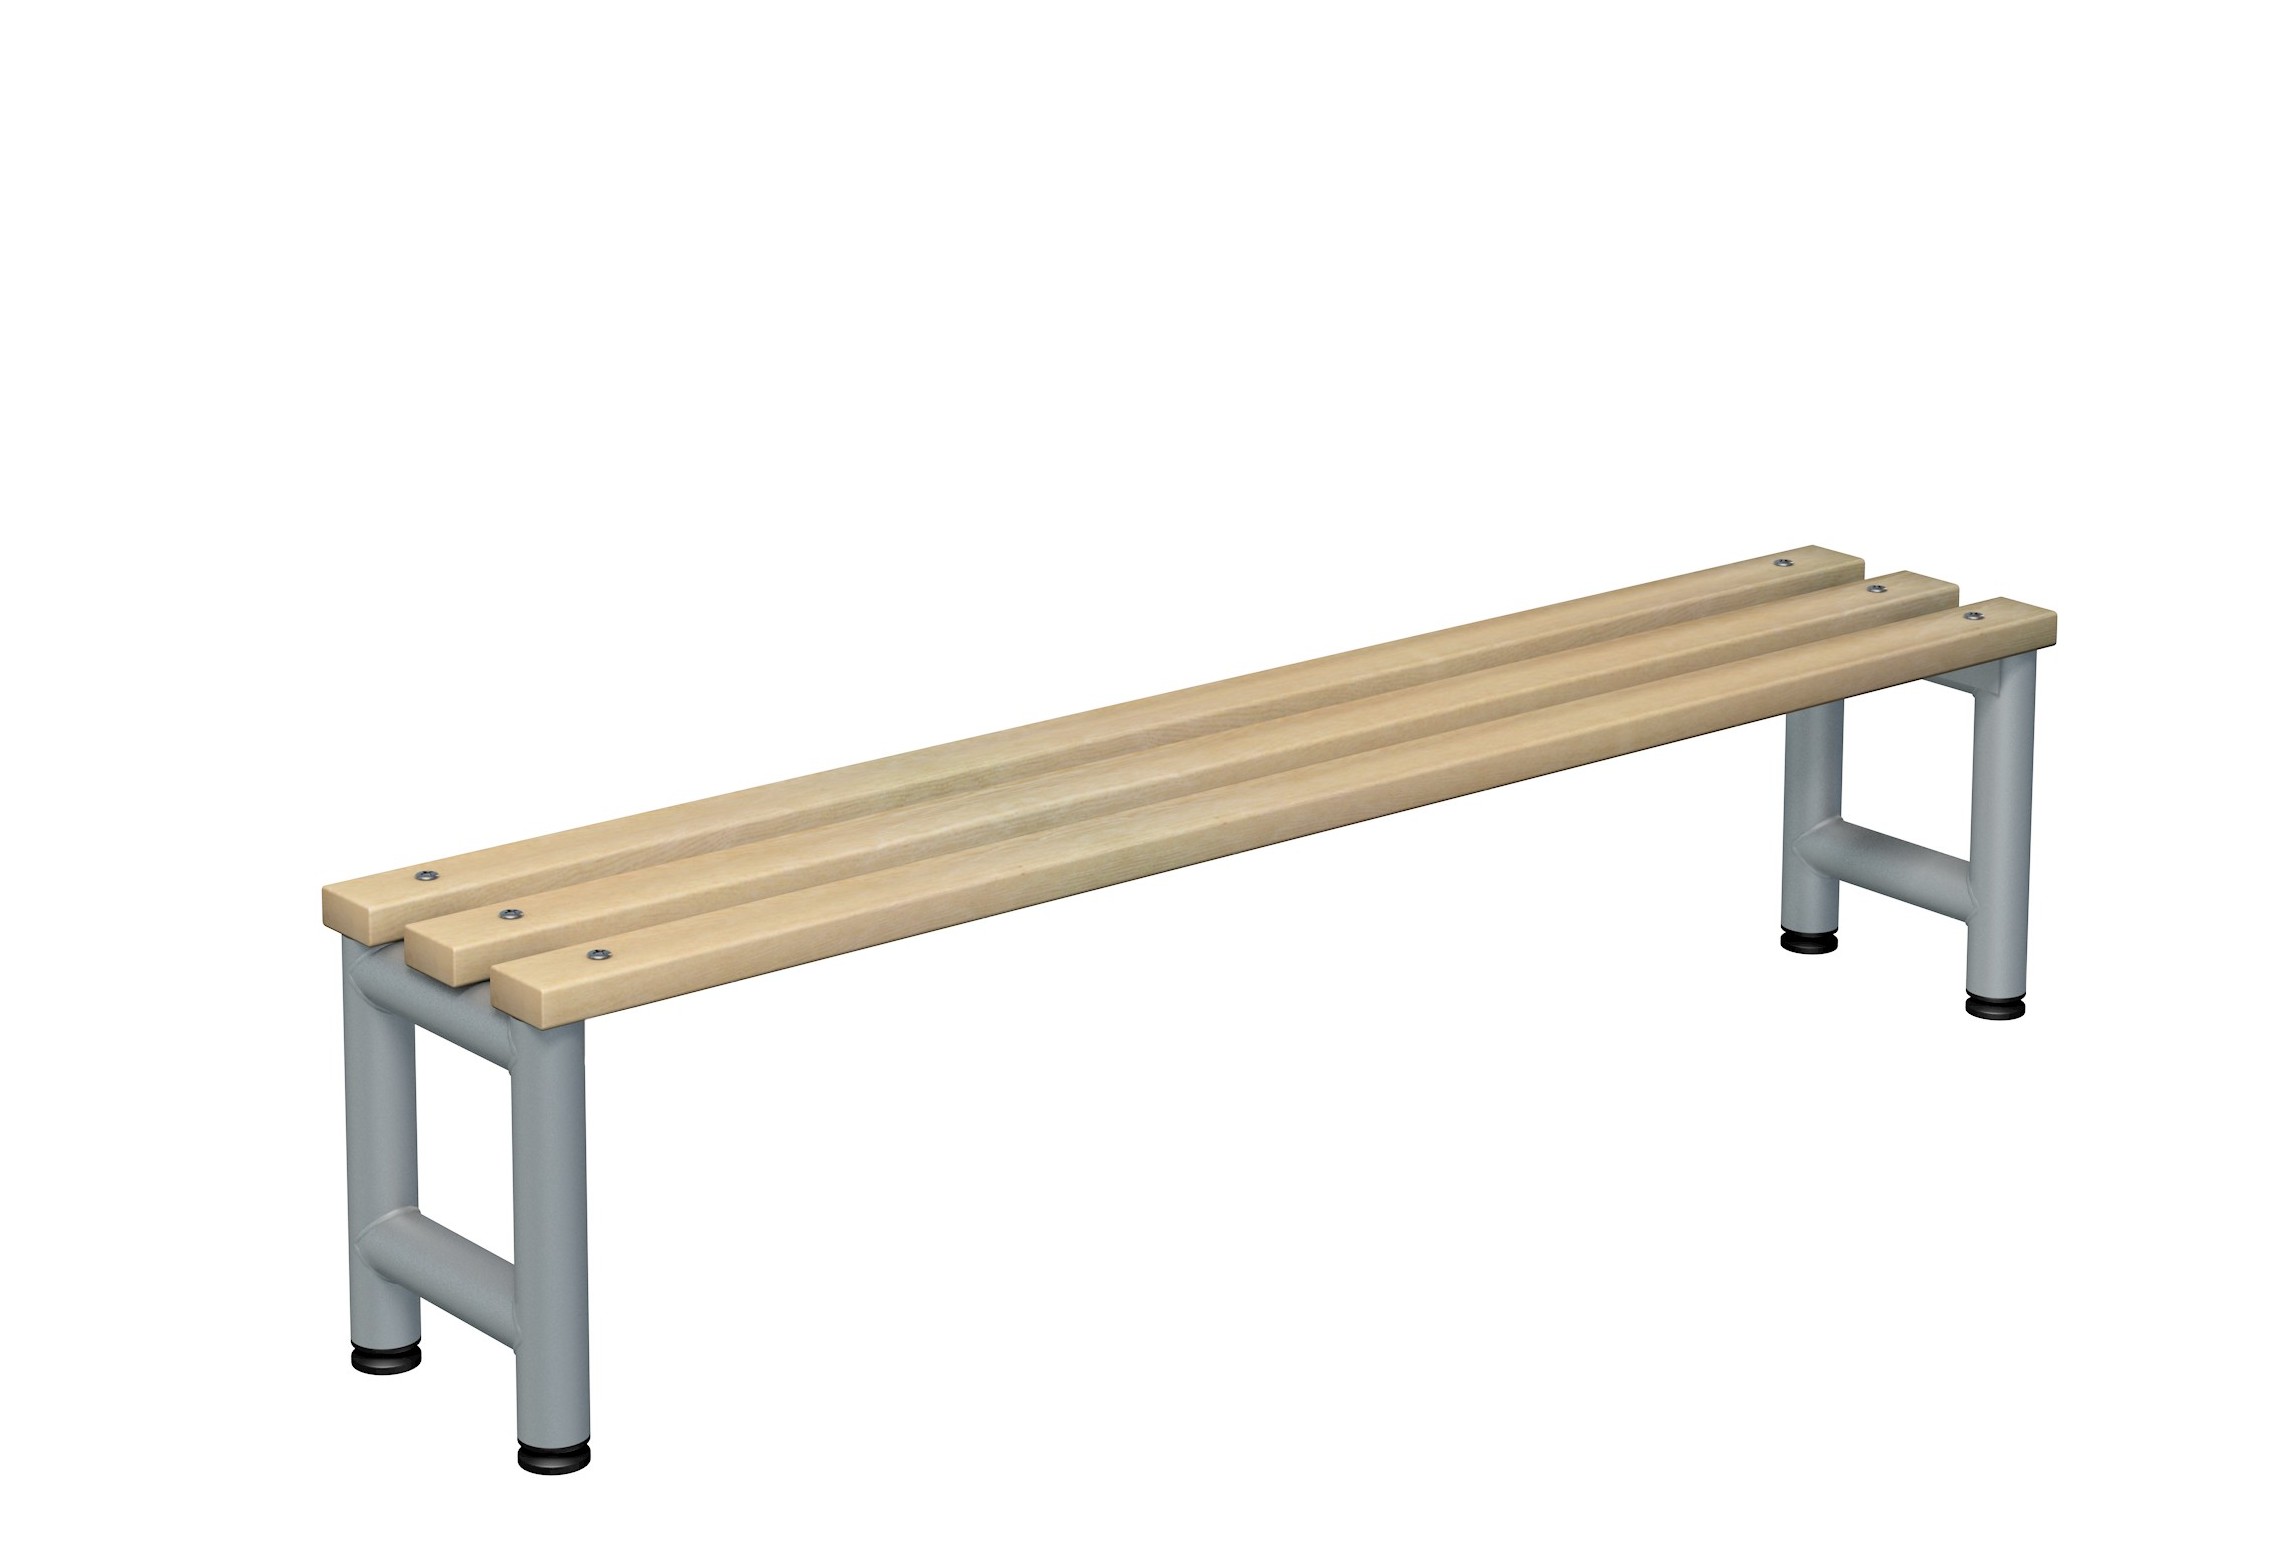 Single Sided Bench Type B - Infant